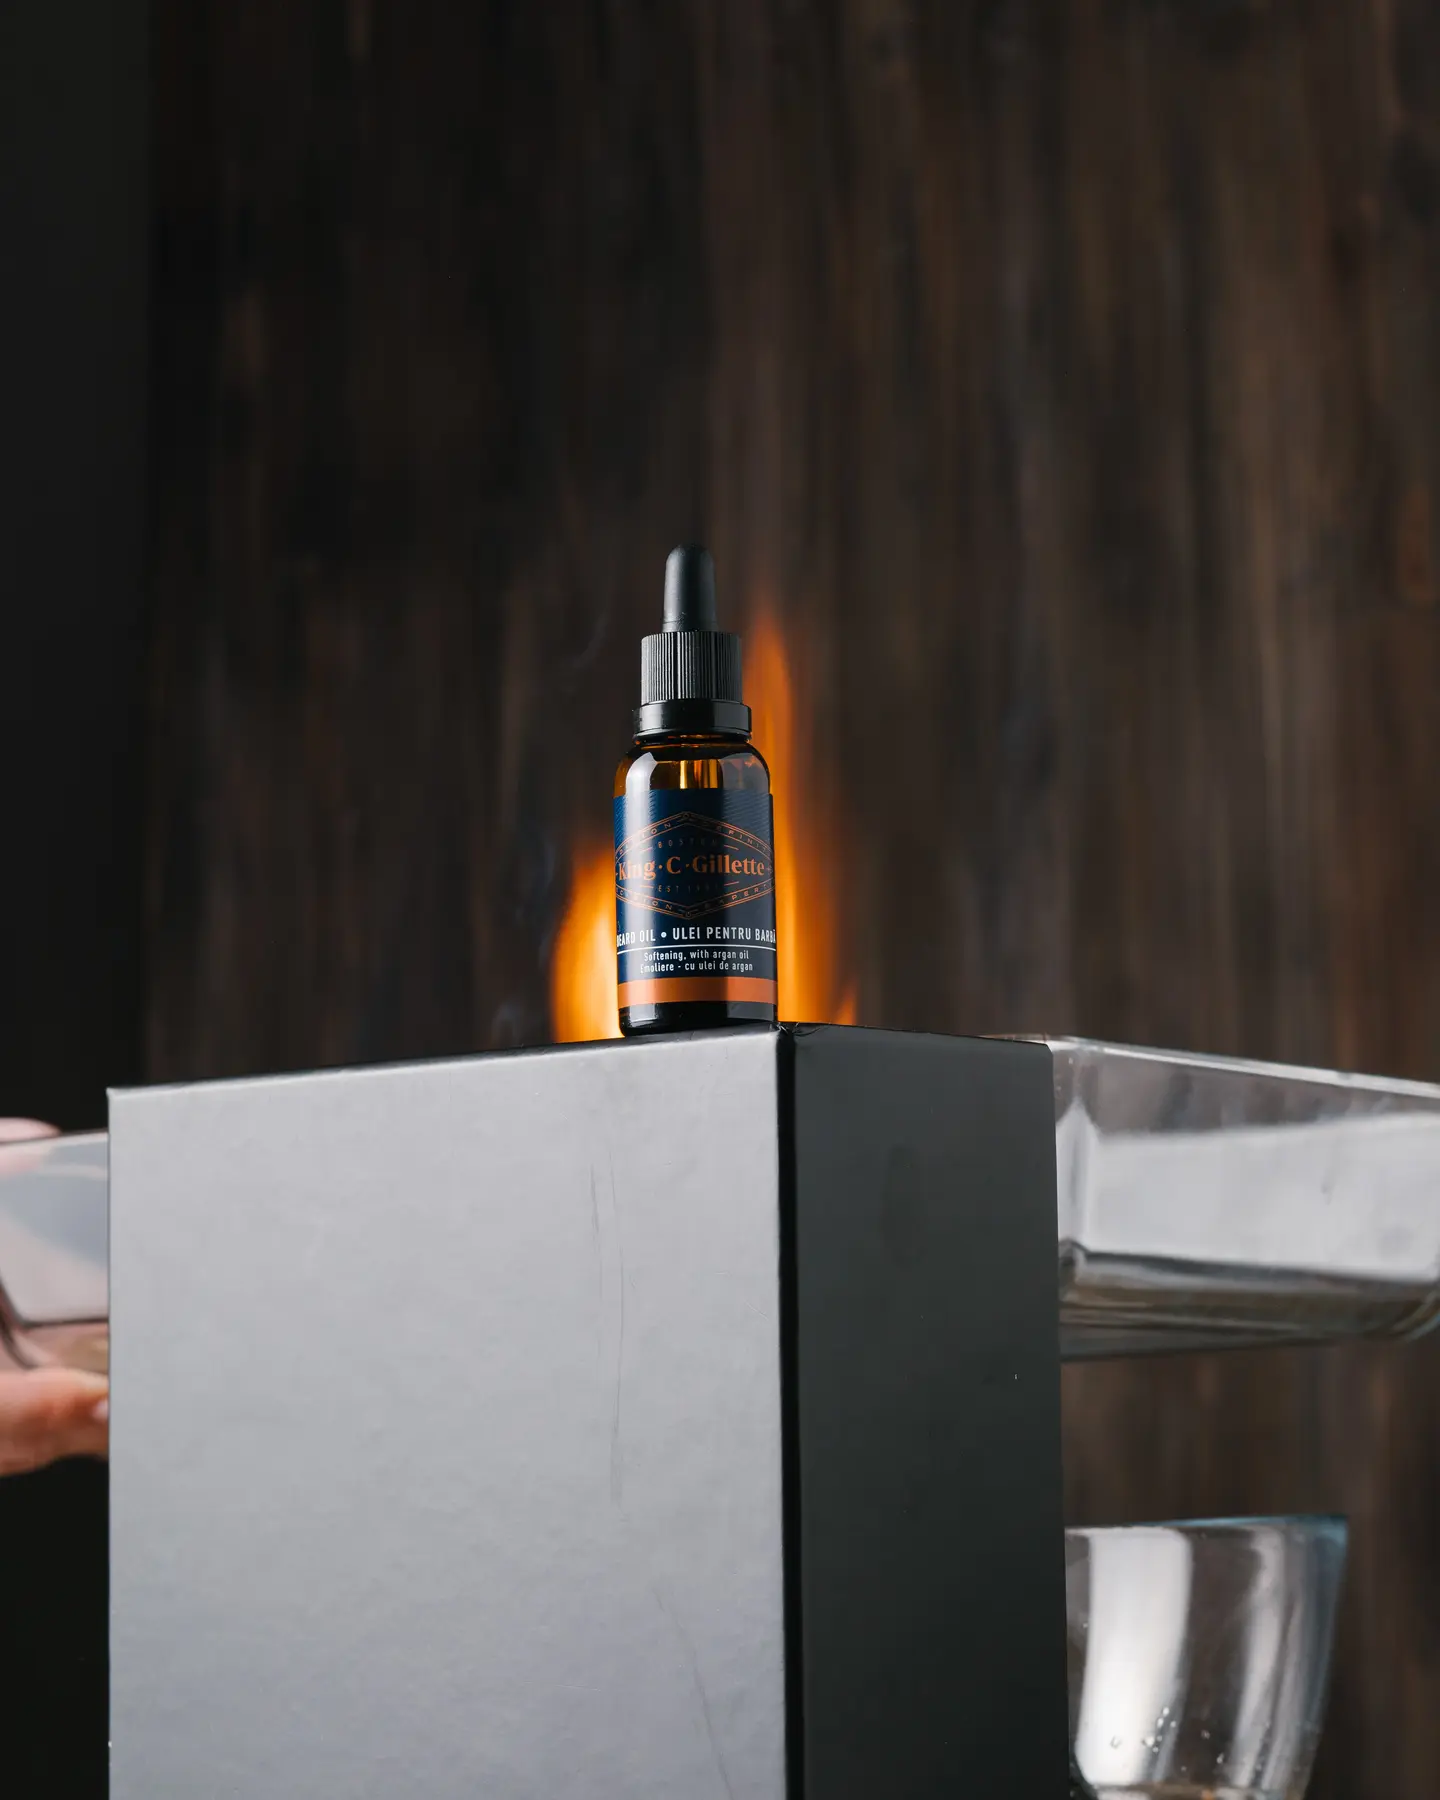 Middle Fire. The photo was taken as a middle flame donor. On the black box is a bottle of King C Gillette of beard oil. It is lit from the left side. A wooden background is visible behind the jar and box.